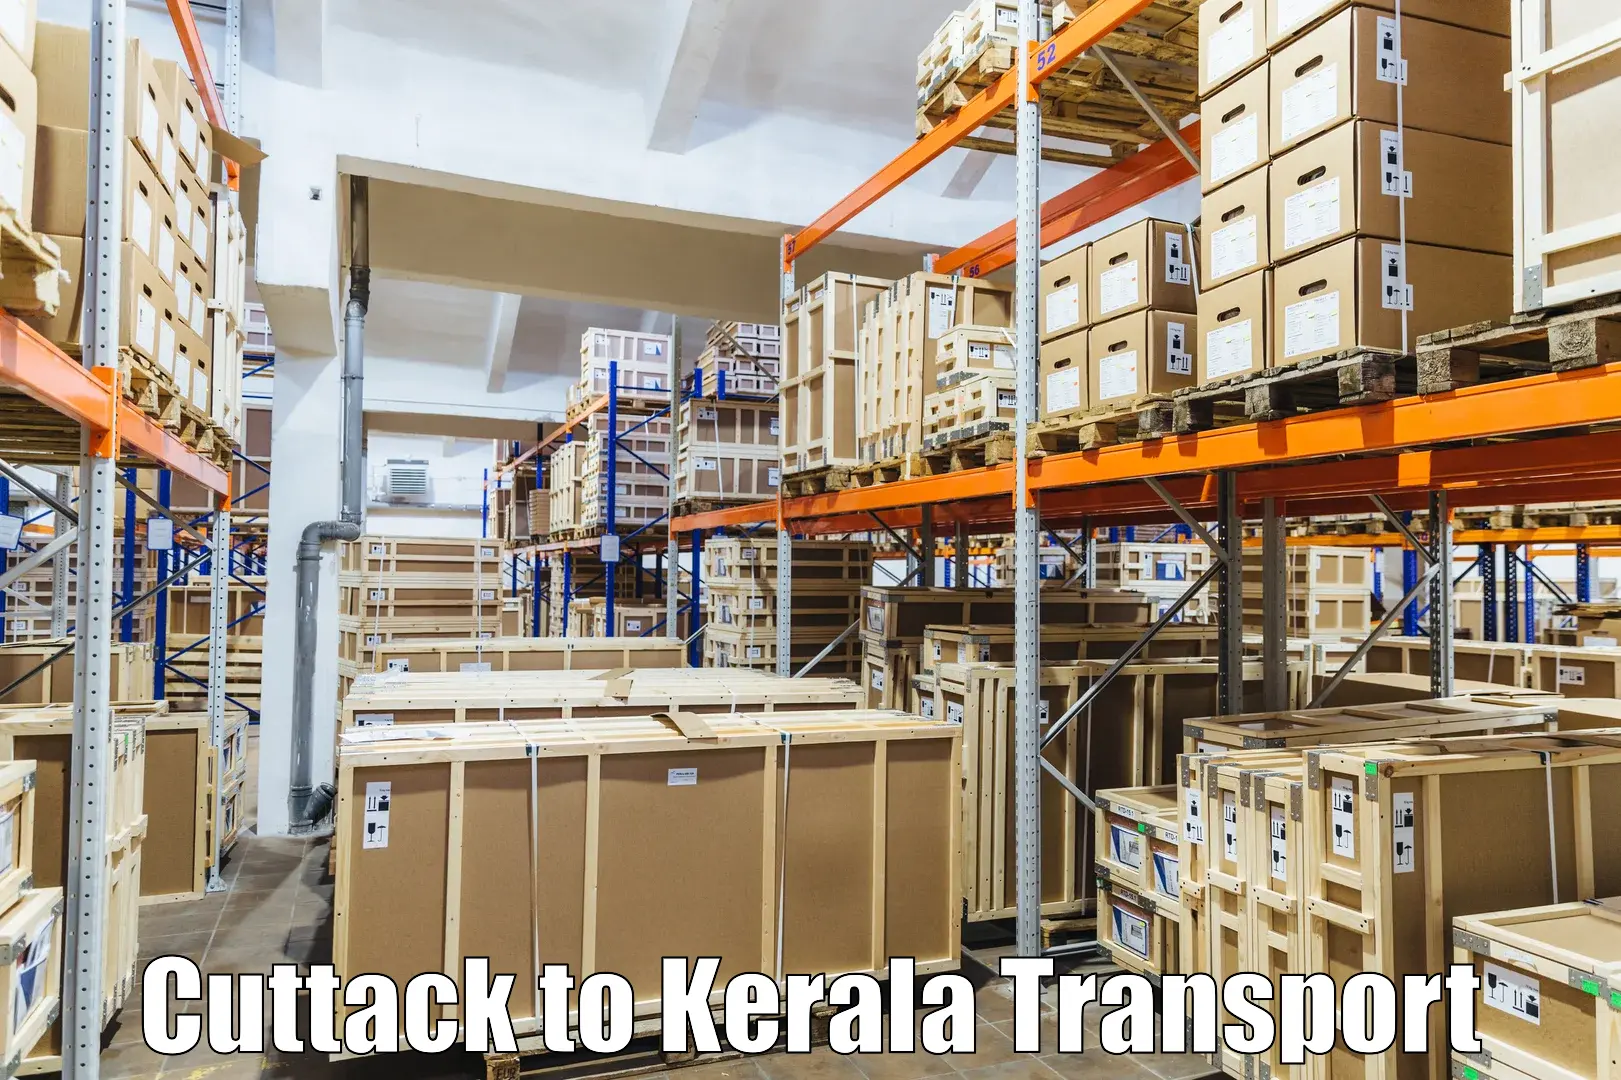 Air freight transport services Cuttack to Kothanalloor